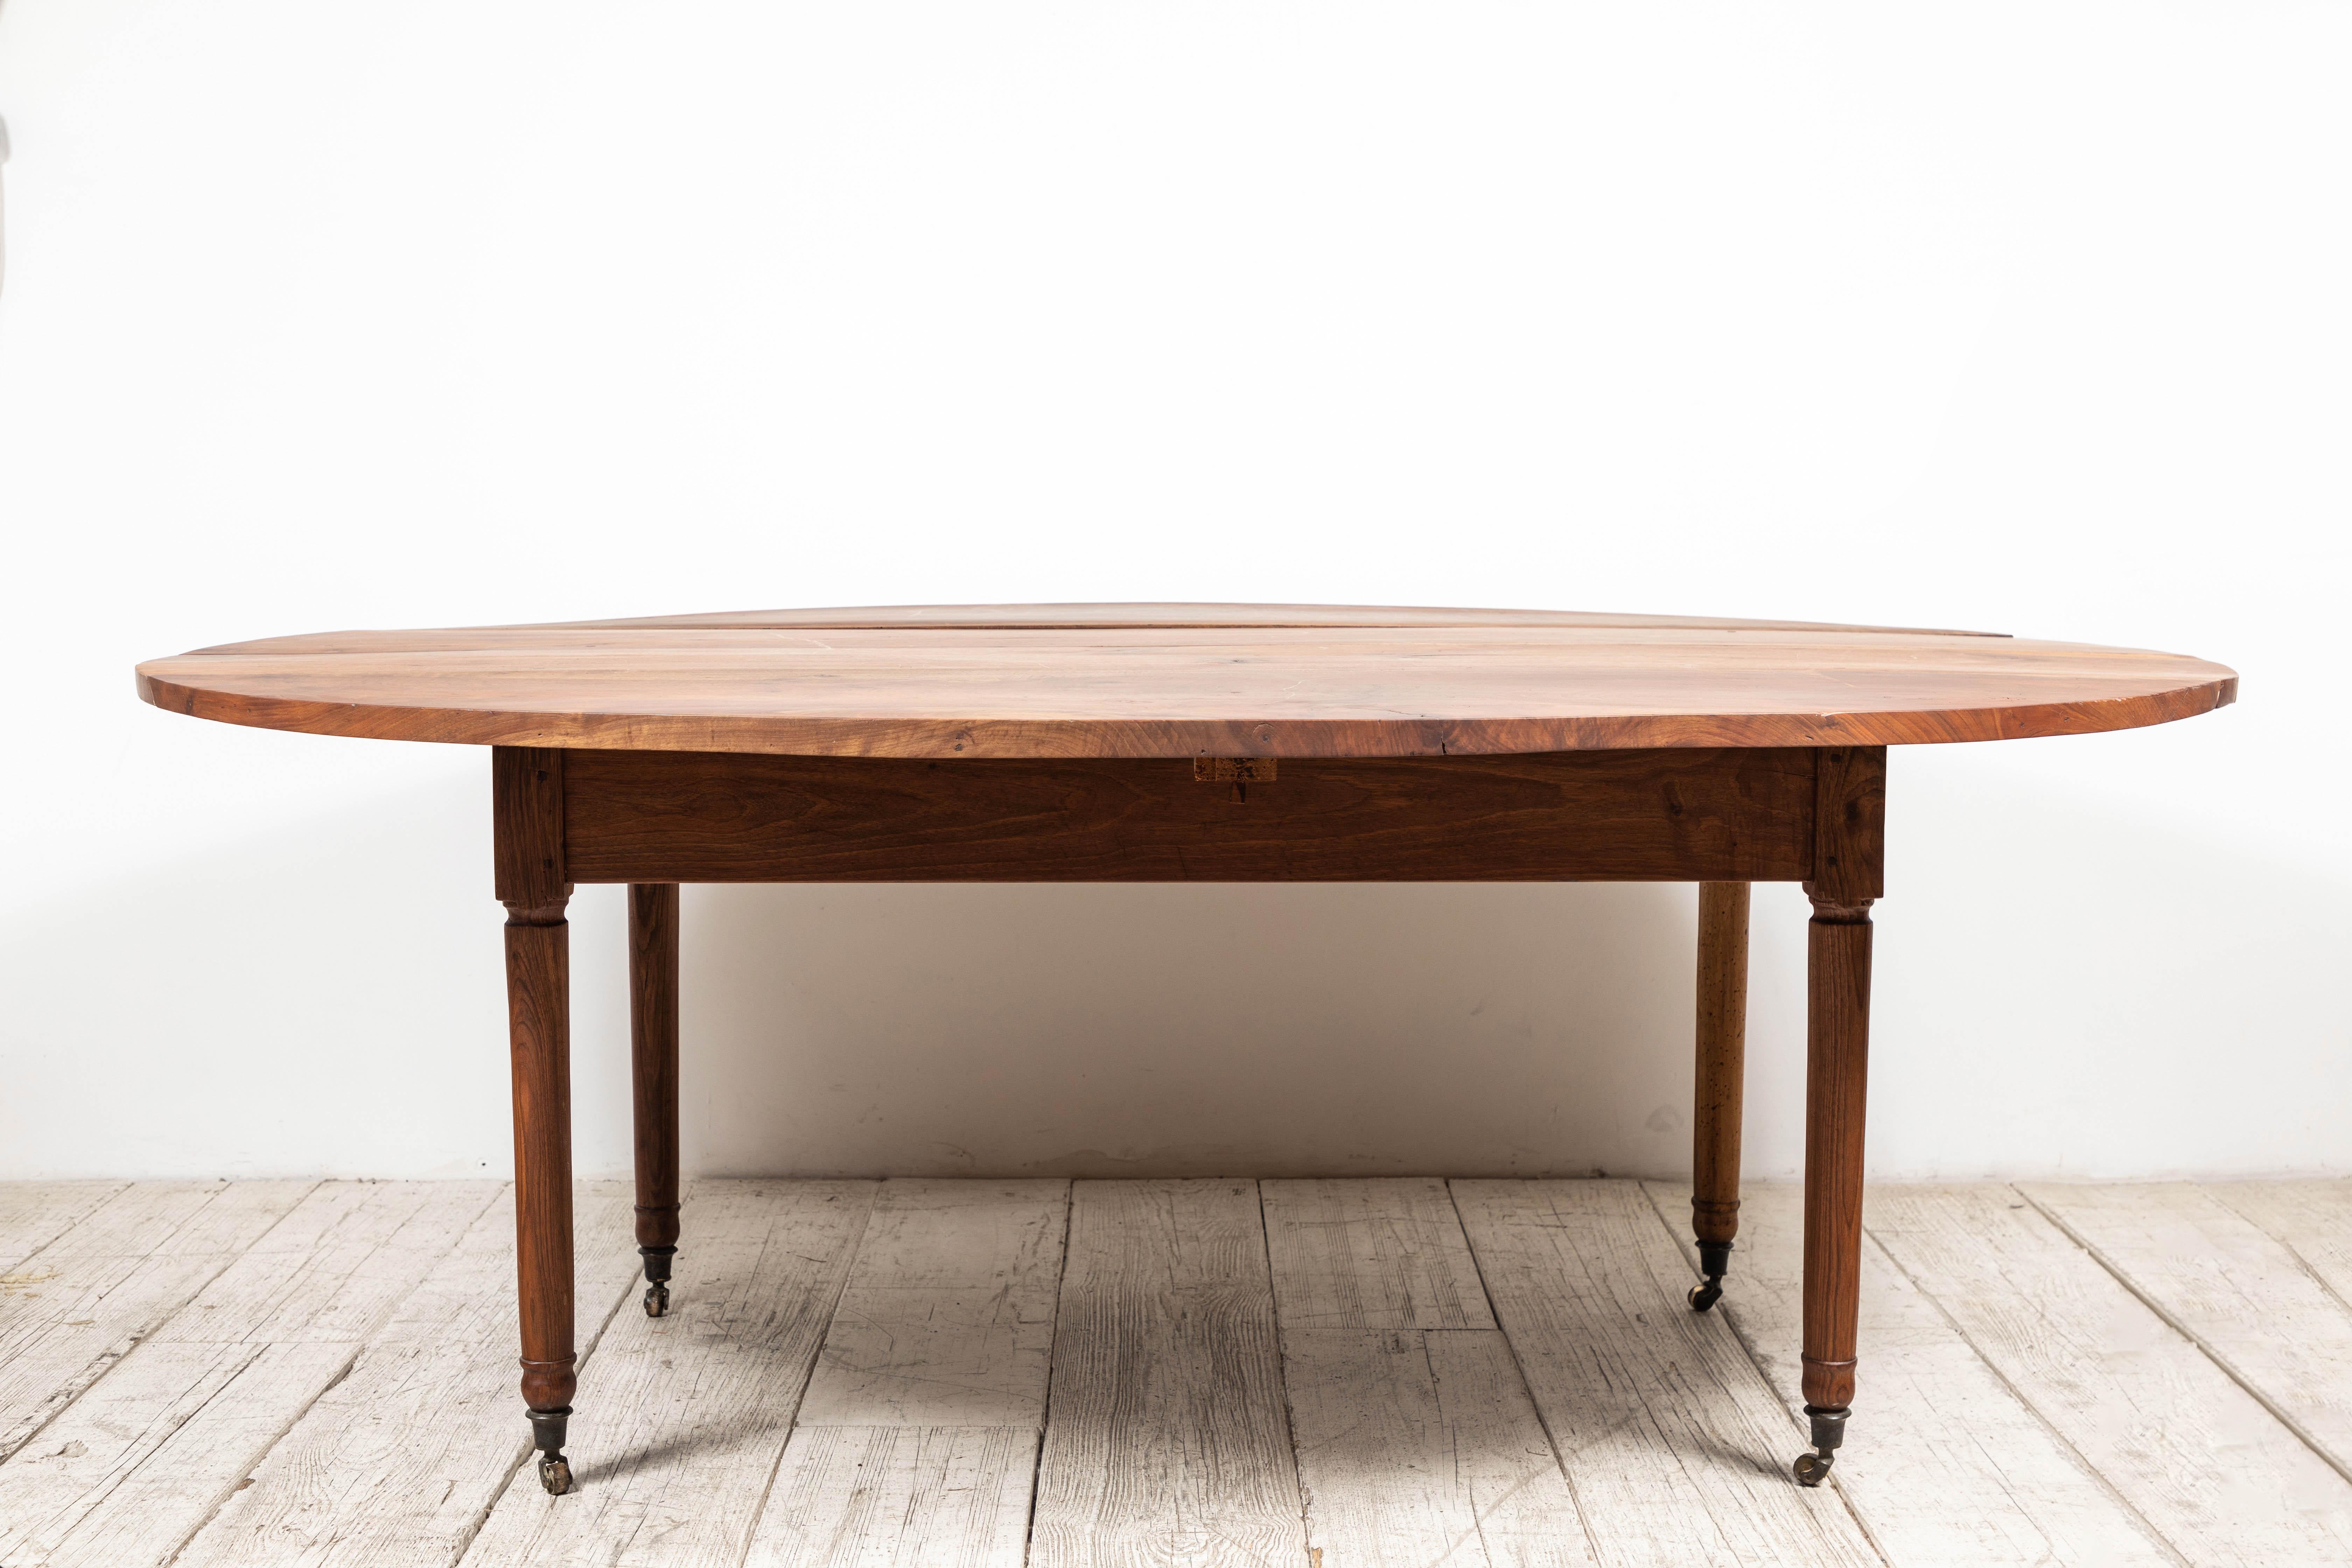 Early 20th Century Early American Oval Mahogany Drop Leaf Table with Turned Legs on Casters